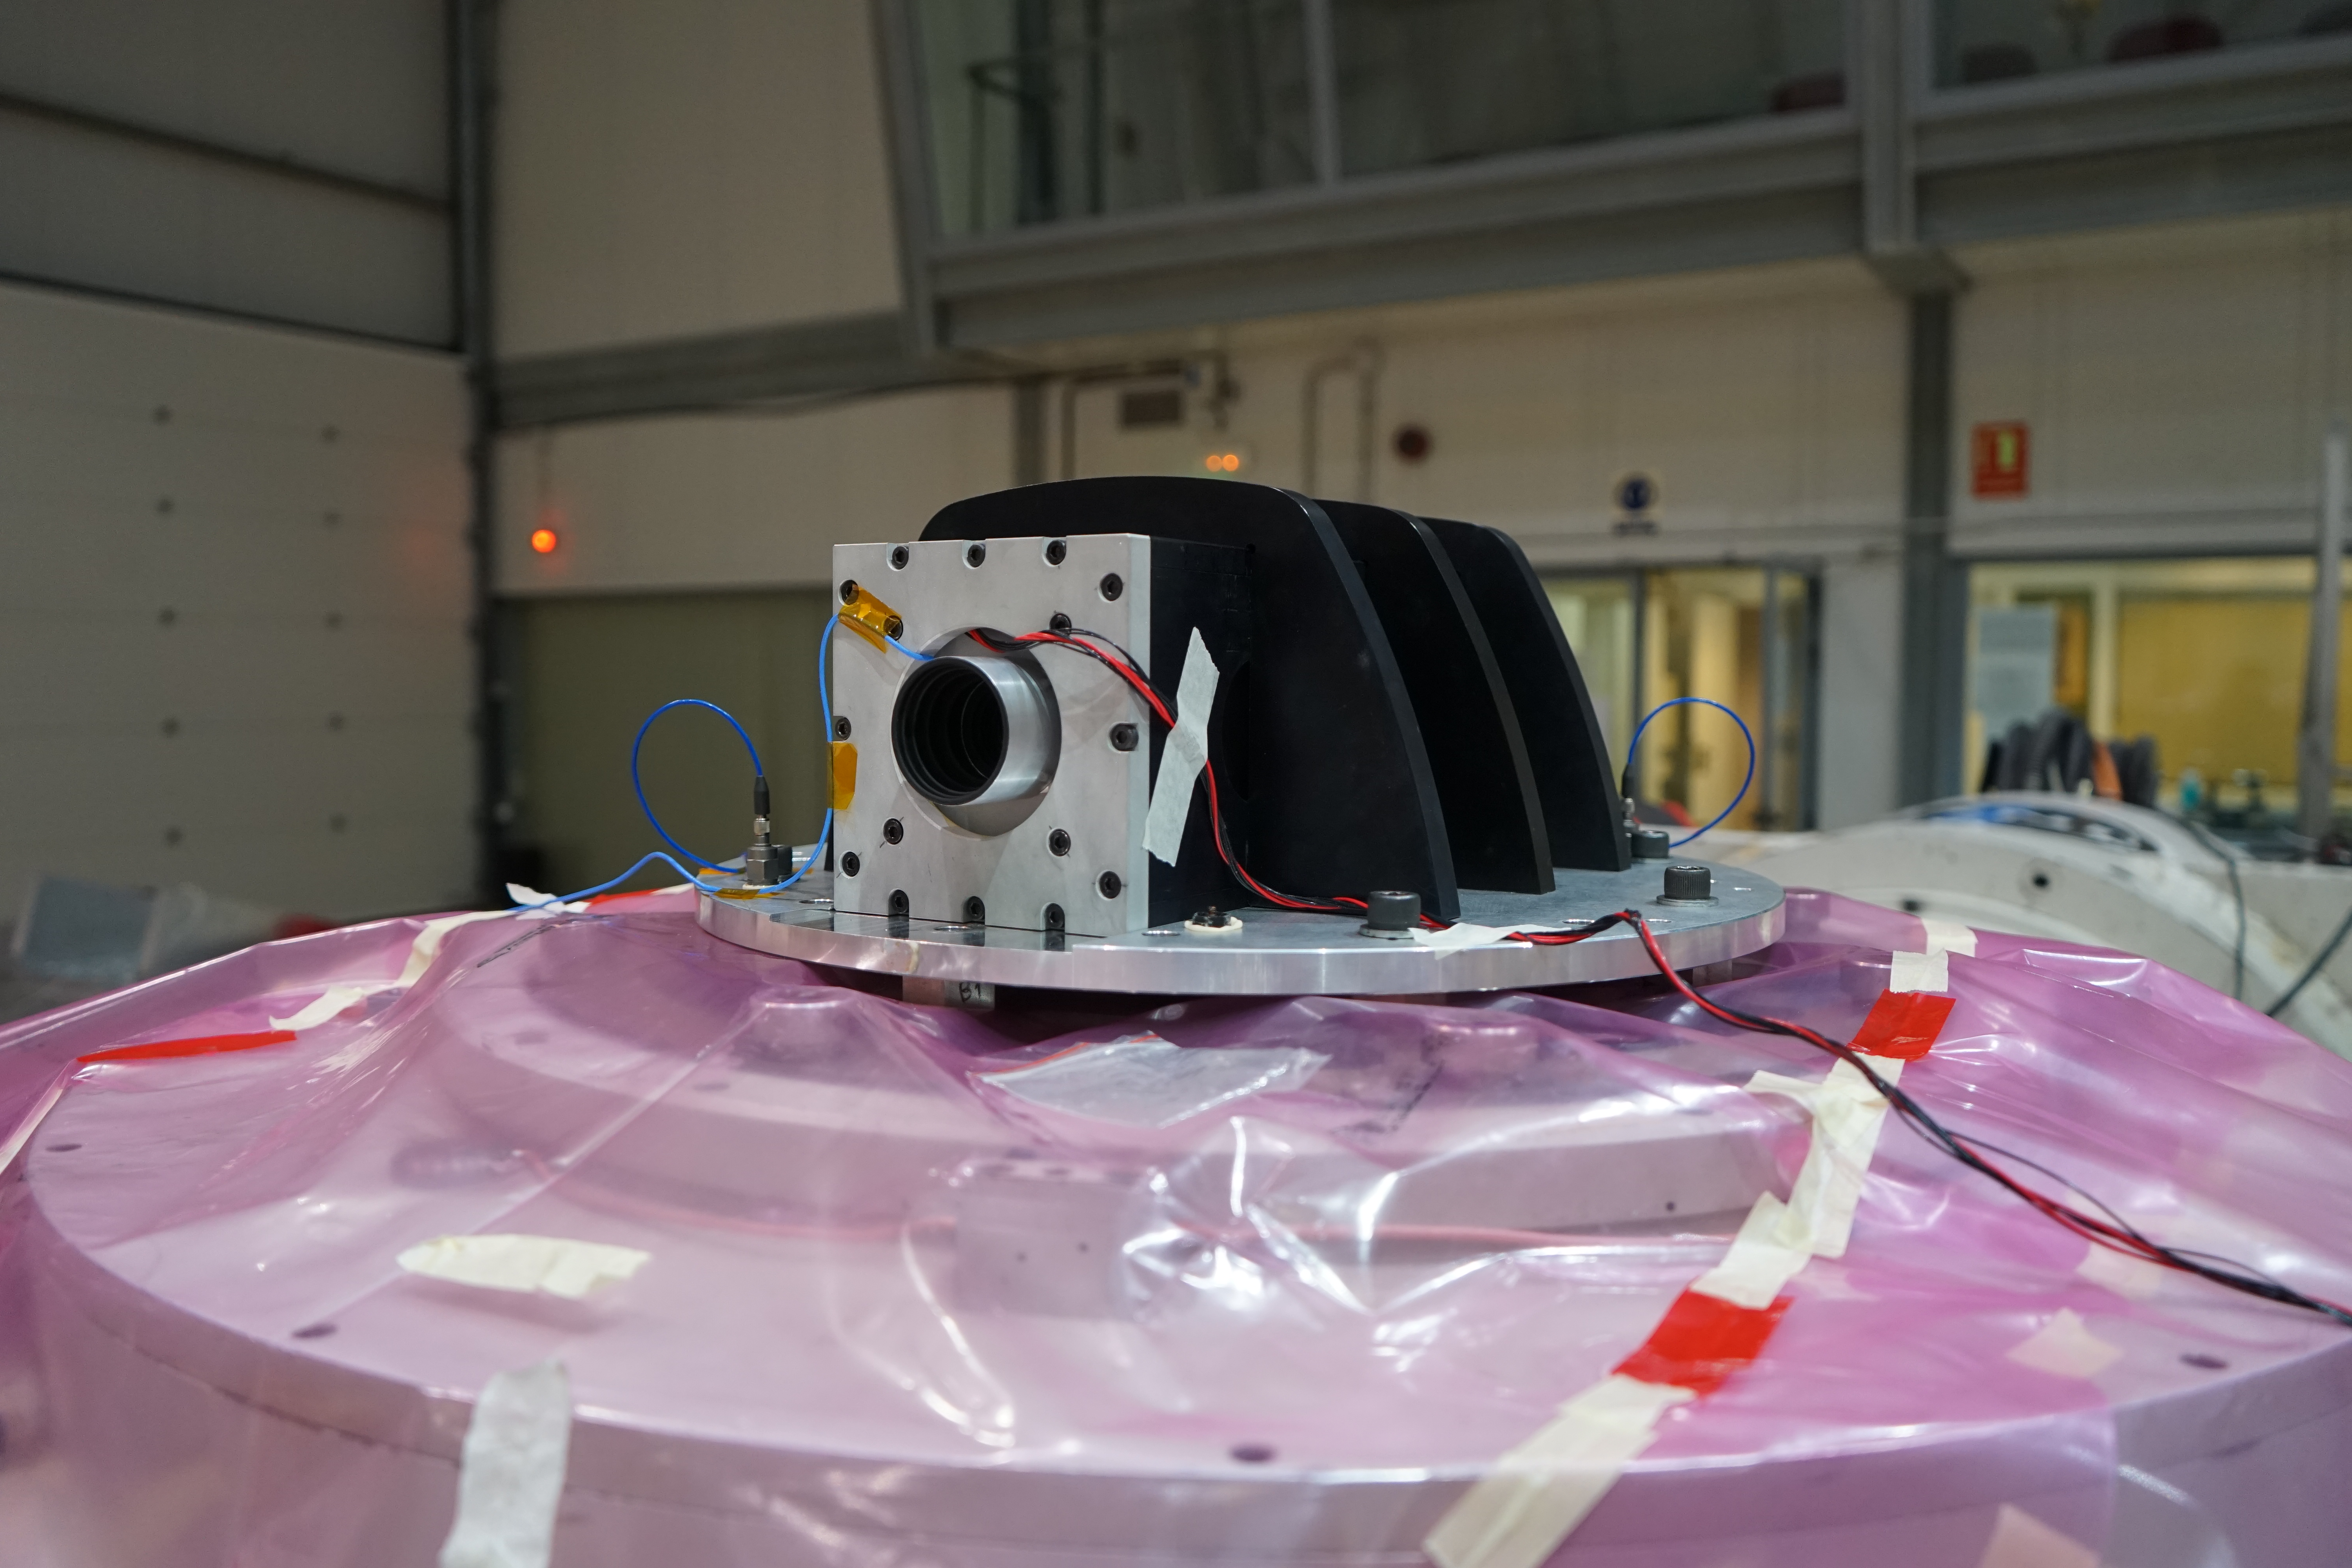 Image of the DRAGO instrument during vibration tests at the INTA (National Institute of Aerospace Technology) Test Area facilities. Credit: Samuel Sordo (IAC).